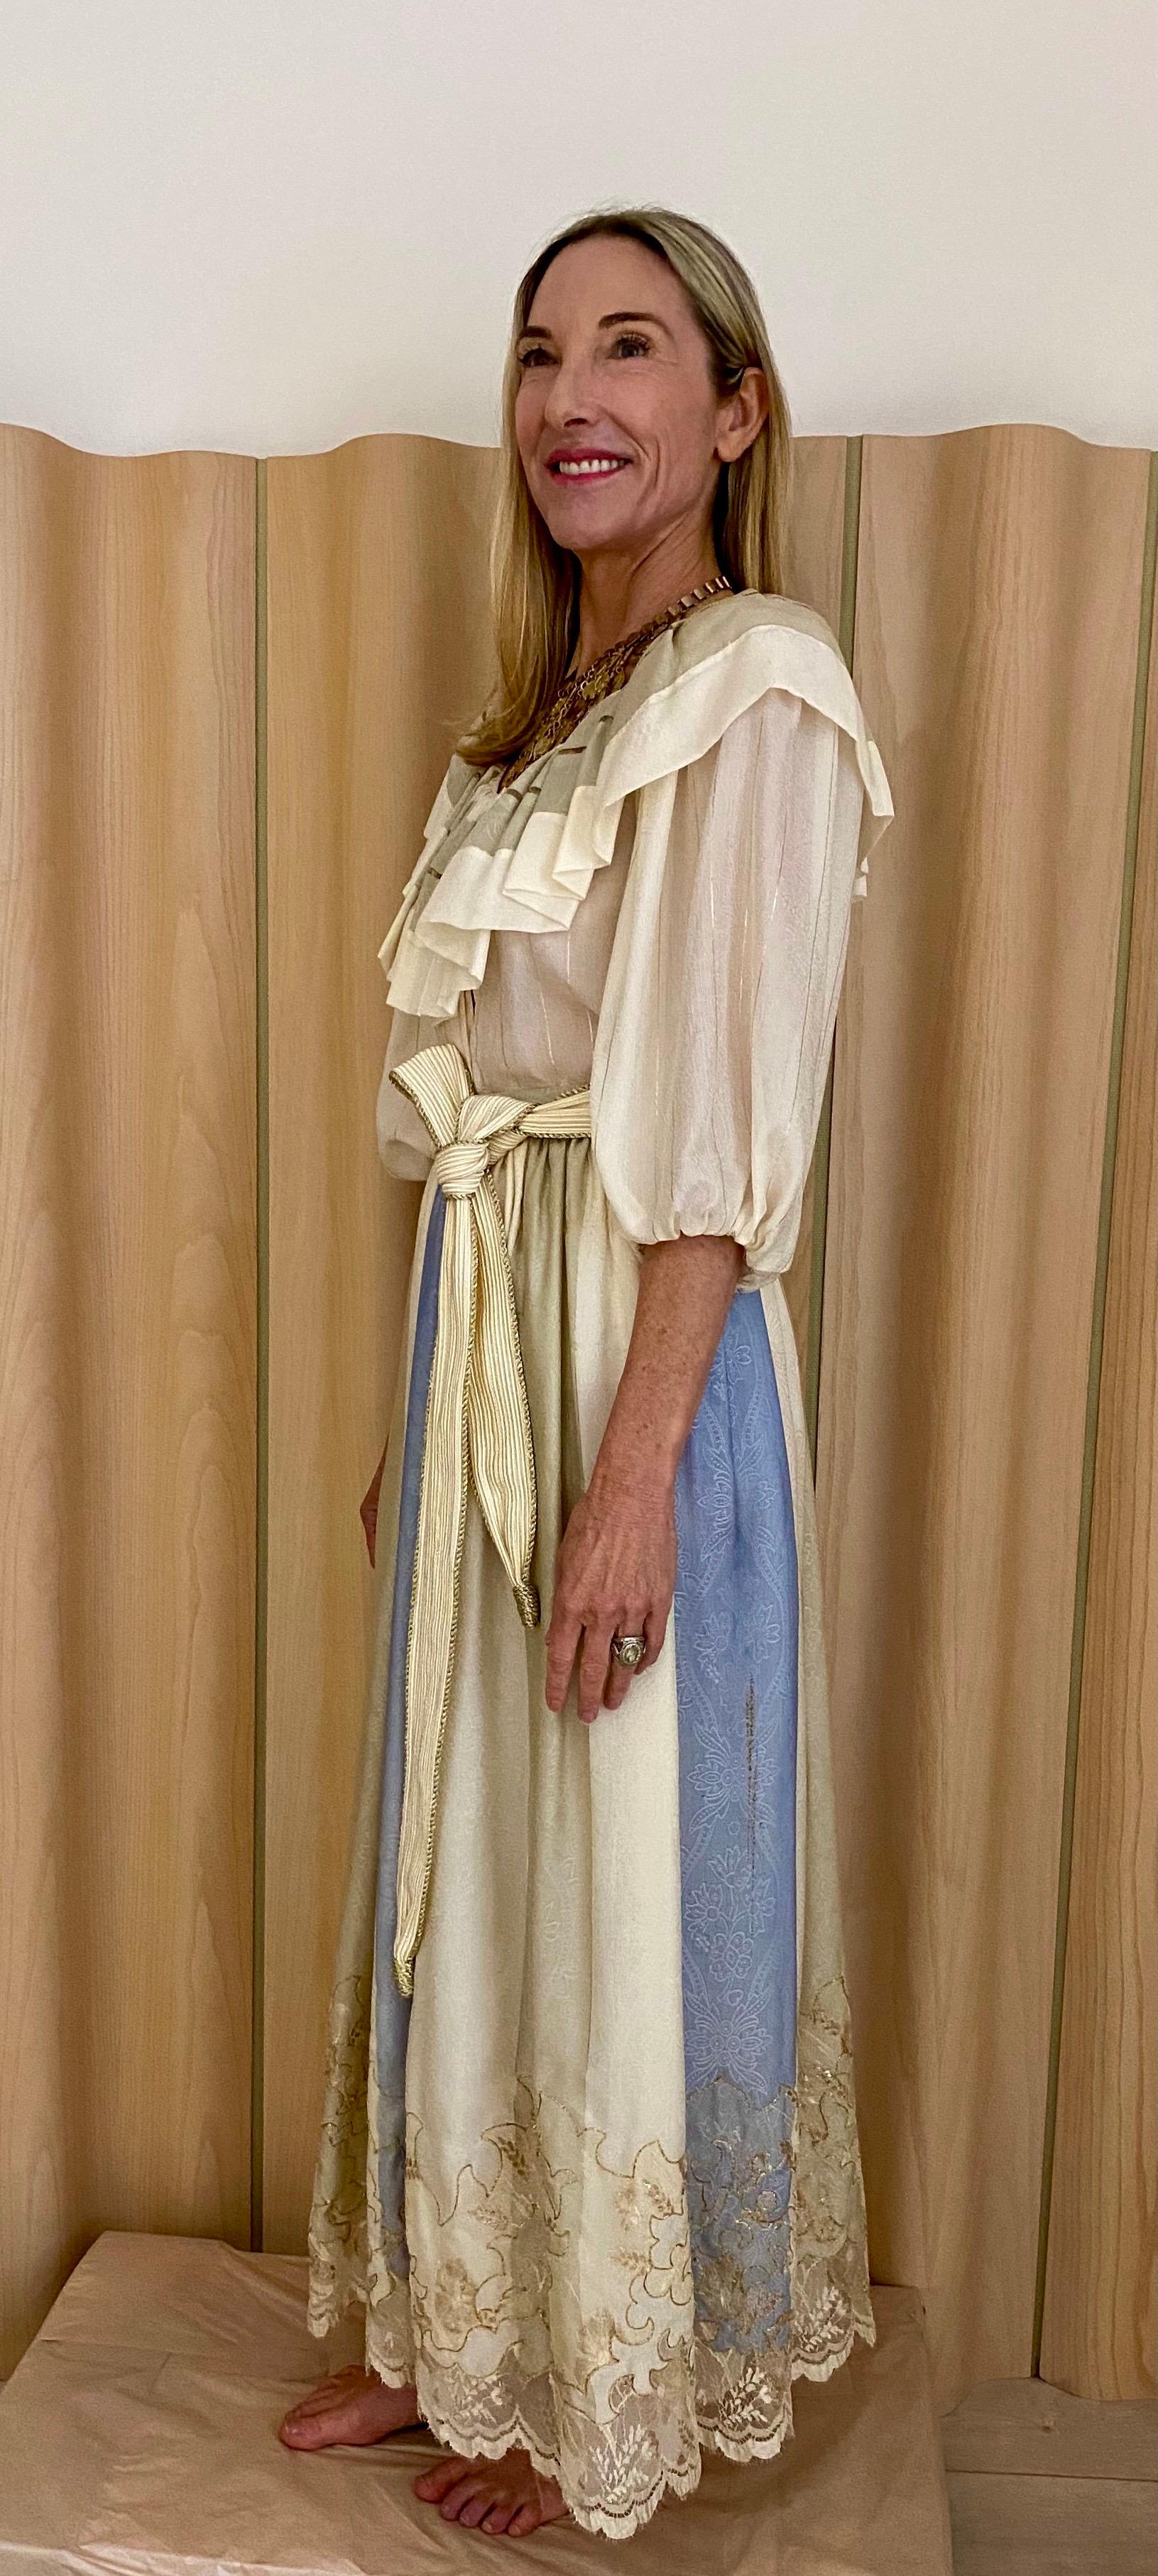 1970s Oscar de la Renta creme silk jacquard blouse and maxi skirt with blue panel and metallic thread embroidery.
Ruffle collar. Woven Belt.
Blouse measurement: Bust: 36” 
Skirt measurement: 26”/ Skirt Length: 40”

Note: There is light yellowish